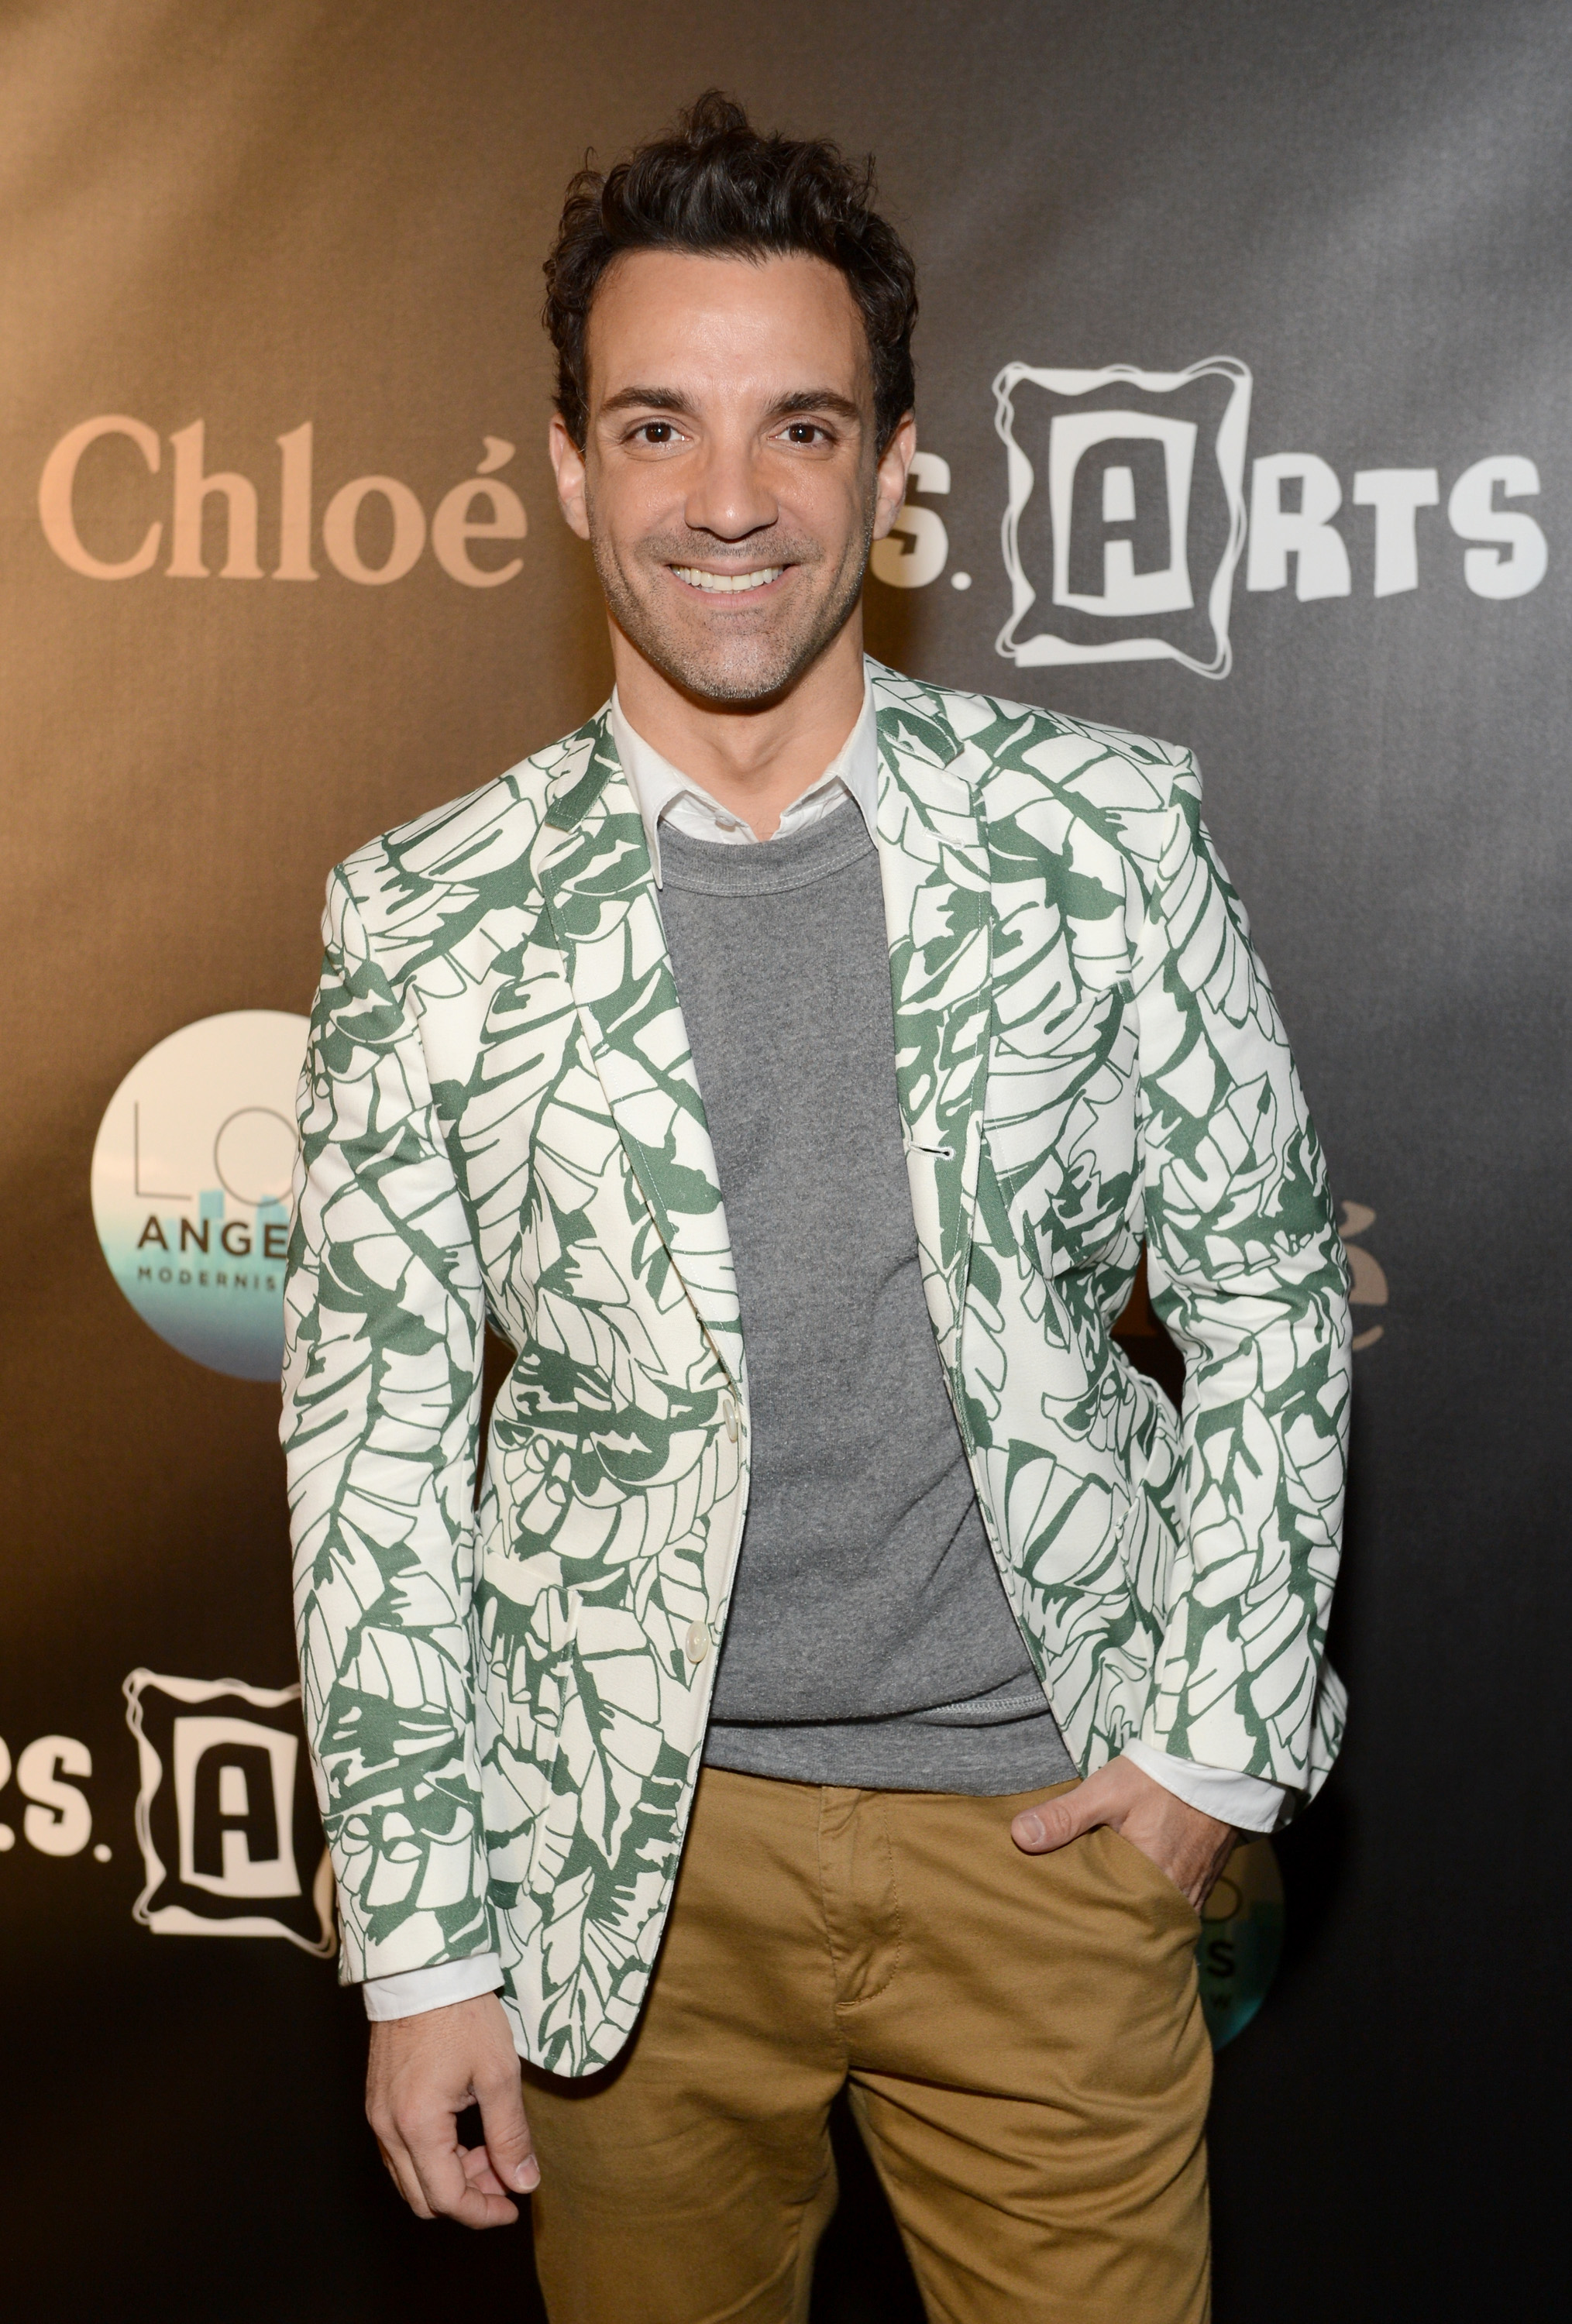 SANTA MONICA, CA - APRIL 25:  Celebrity Stylist George Kotsiopoulos attends P.S. ARTS Presents: LA Modernism Show Opening Night at The Barker Hanger on April 25, 2013 in Santa Monica, California.  (Photo by Michael Kovac/Getty Images for P.S. Arts)